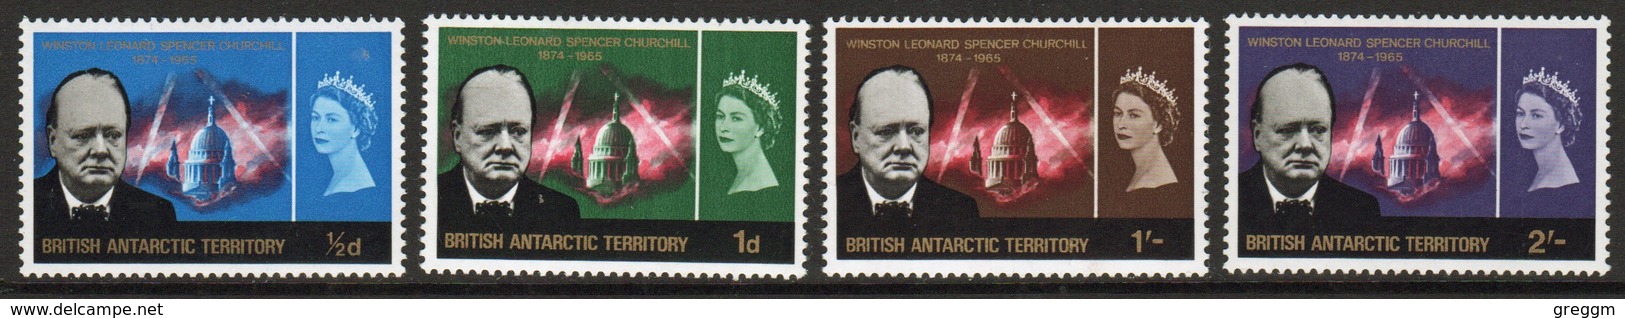 British Antarctic Territory 1966 Set Of Stamps To Celebrate The Churchill Commemoration In Unmounted Mint Condition. - Unused Stamps